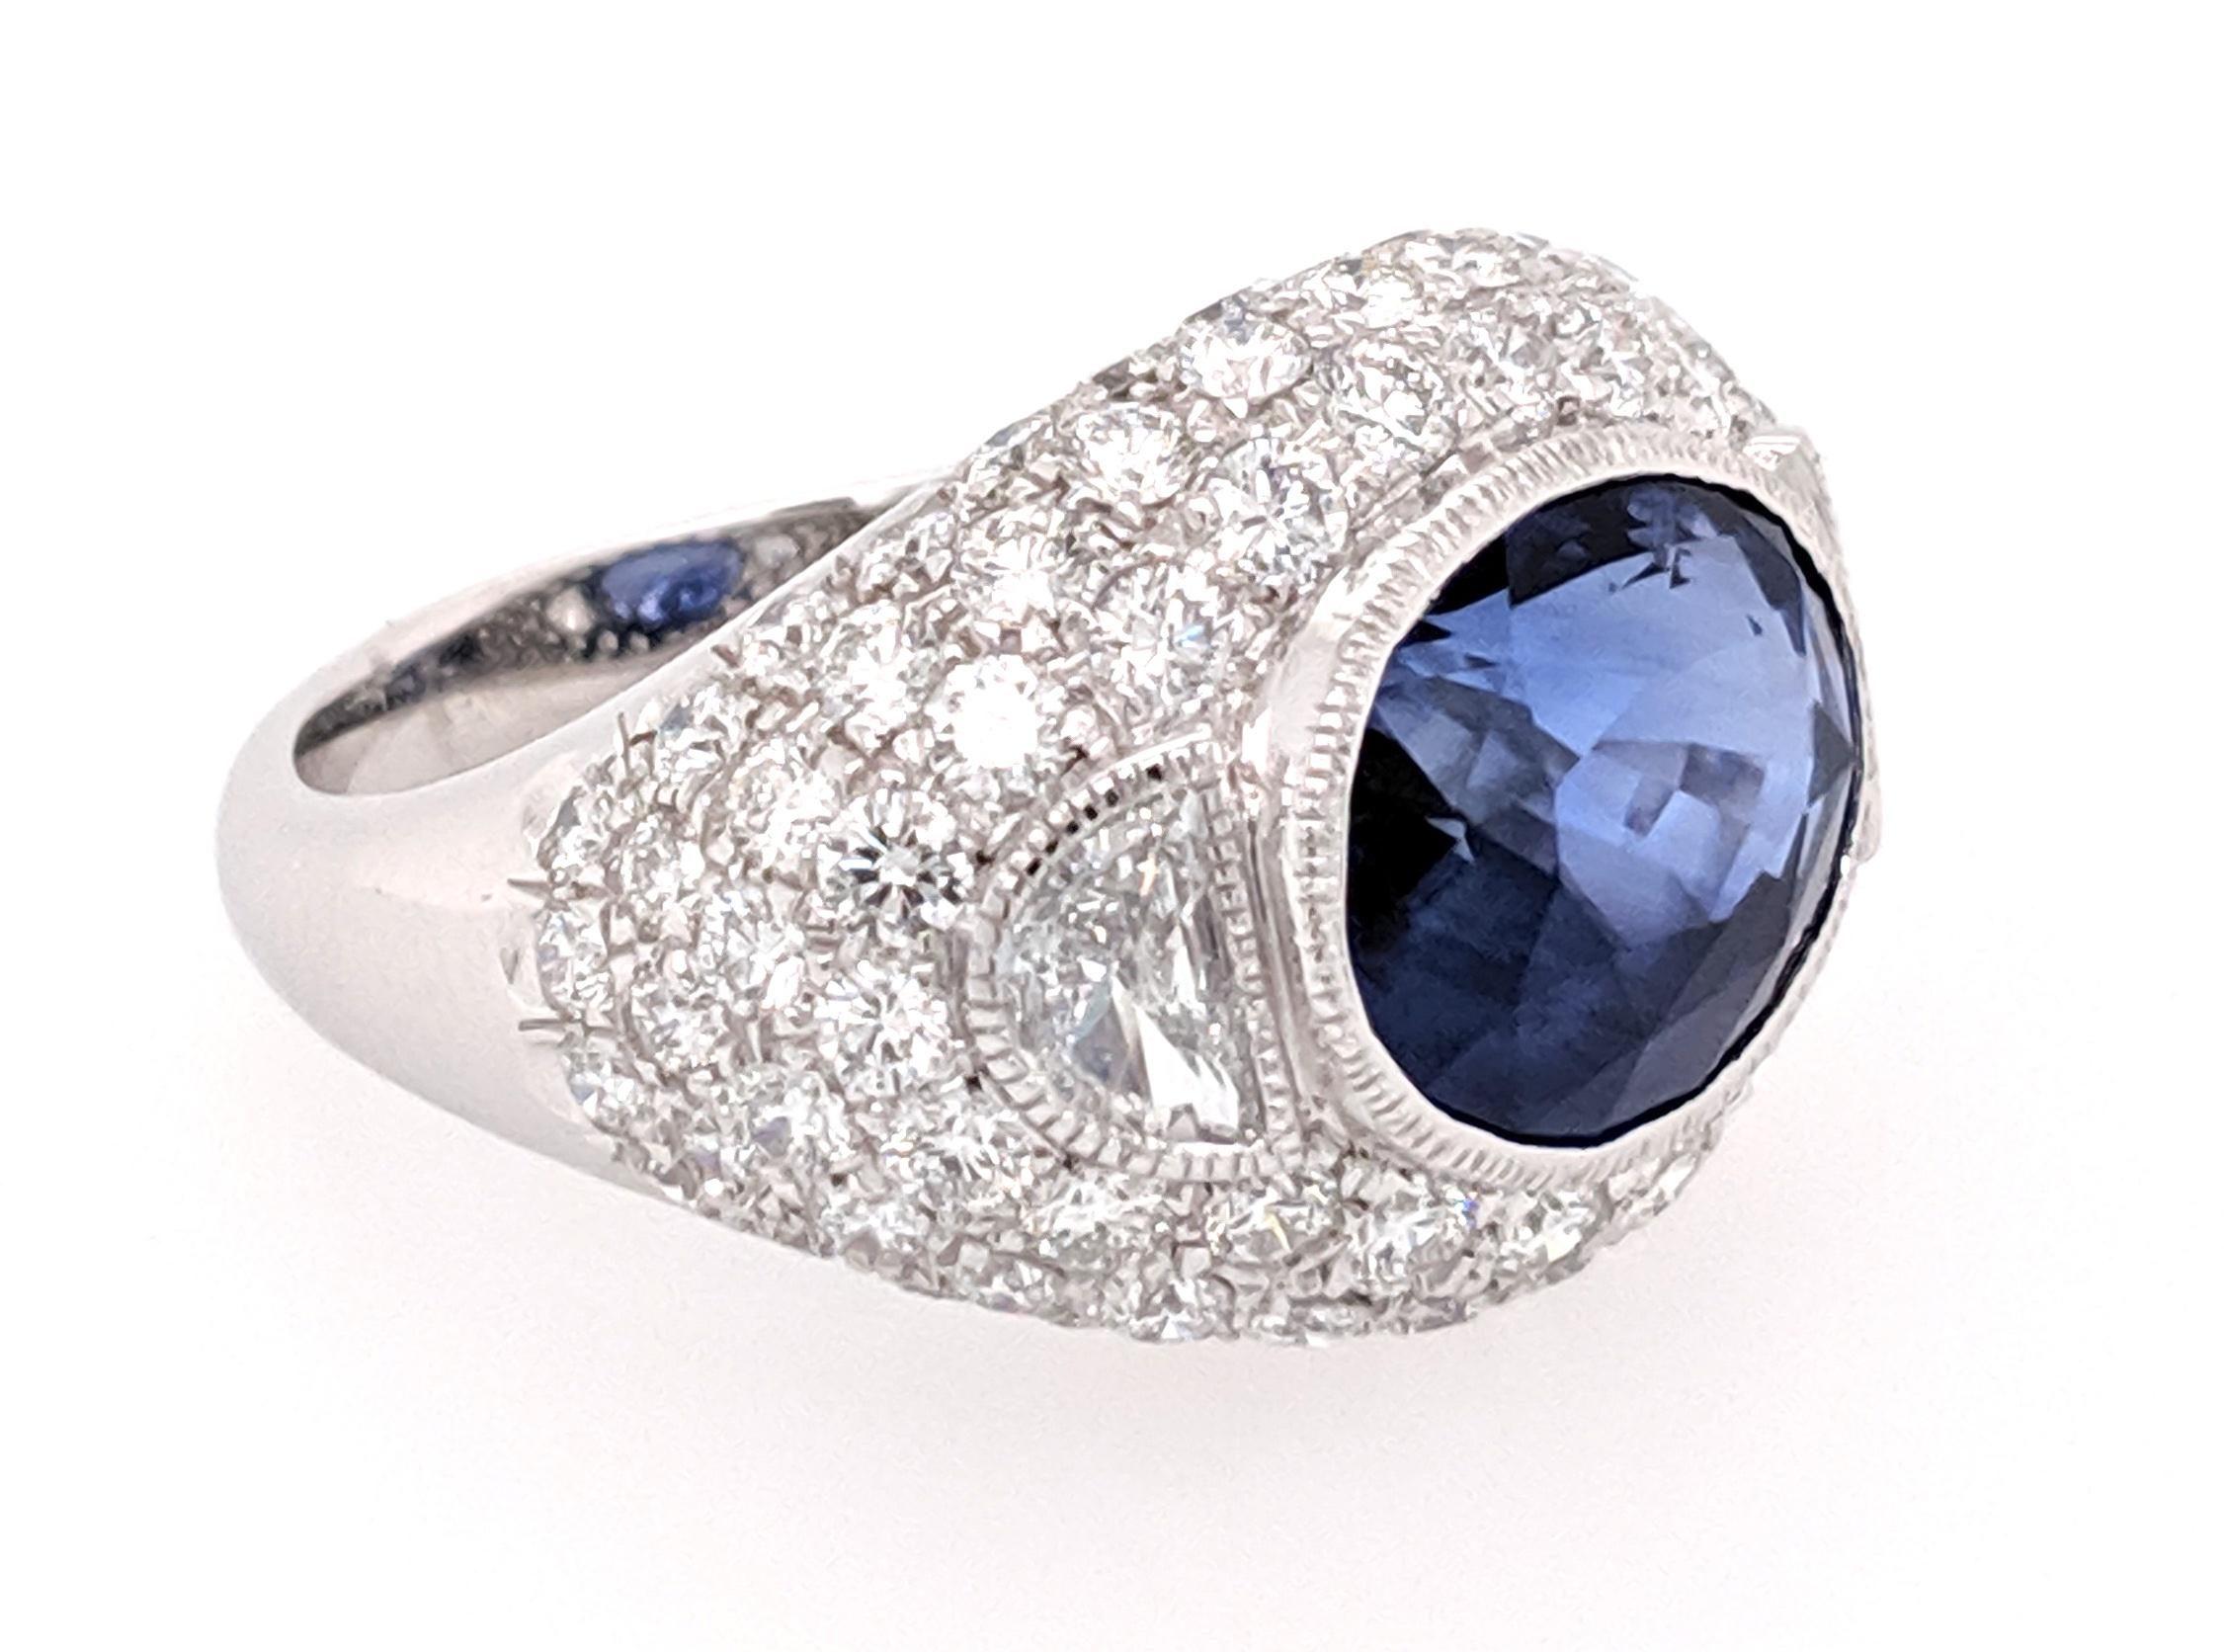 The cocktail ring is crafted in Platinum Featuring (1) Exceptional color oval Sapphire bezel set and weighing 8.23cts and is GIA certified. The sapphire is flanked by (2) half moon shaped diamonds weighing approximately .52cttw and a color of F/G